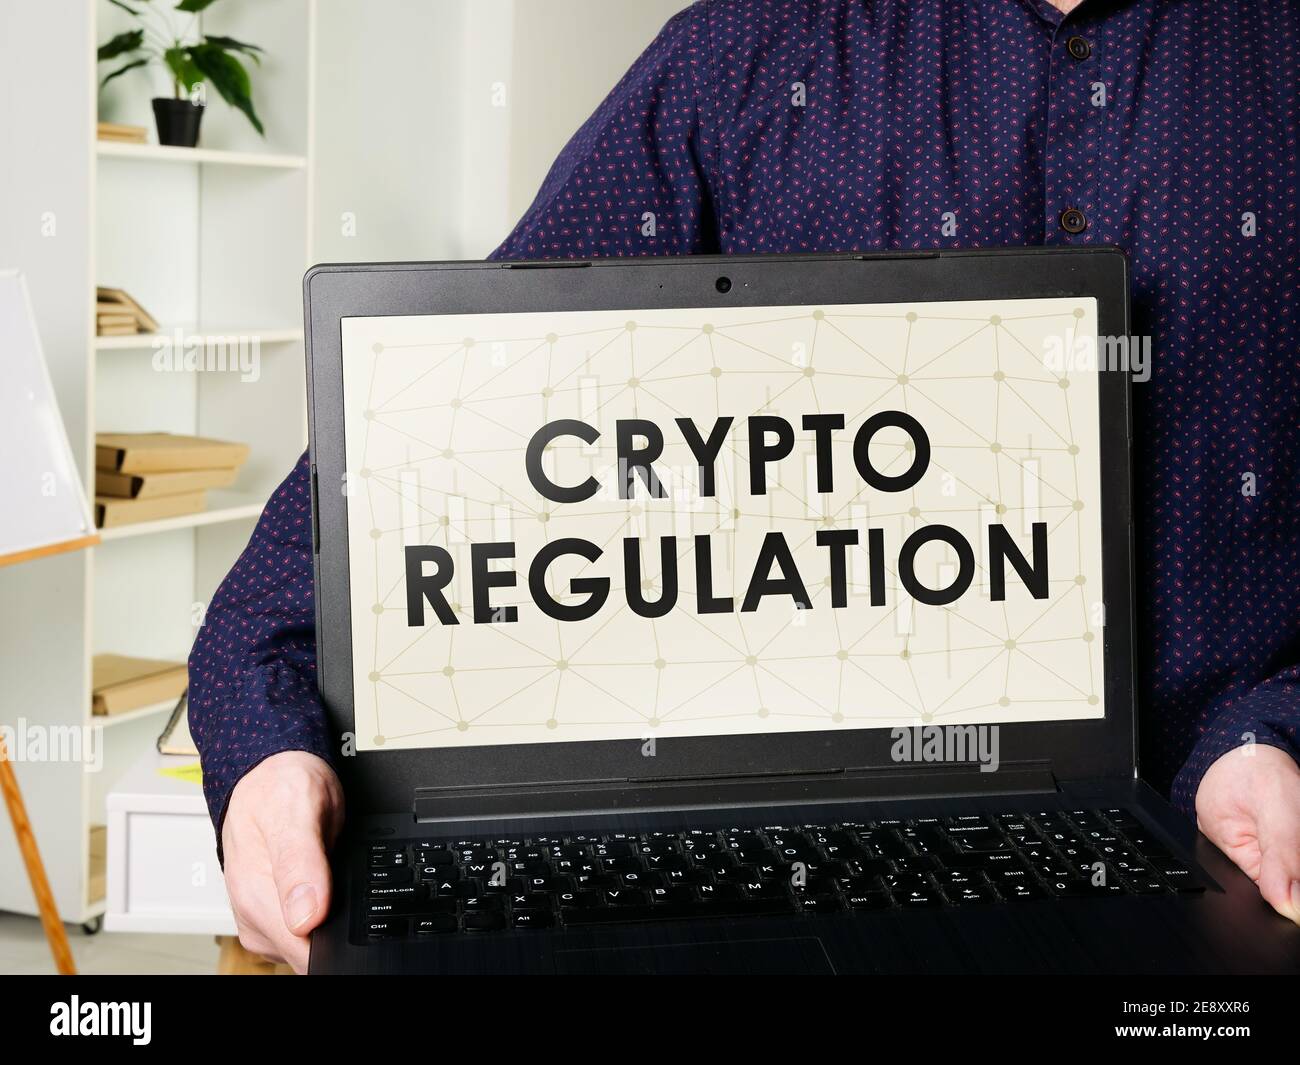 Man shows laptop with crypto regulation rules. Stock Photo